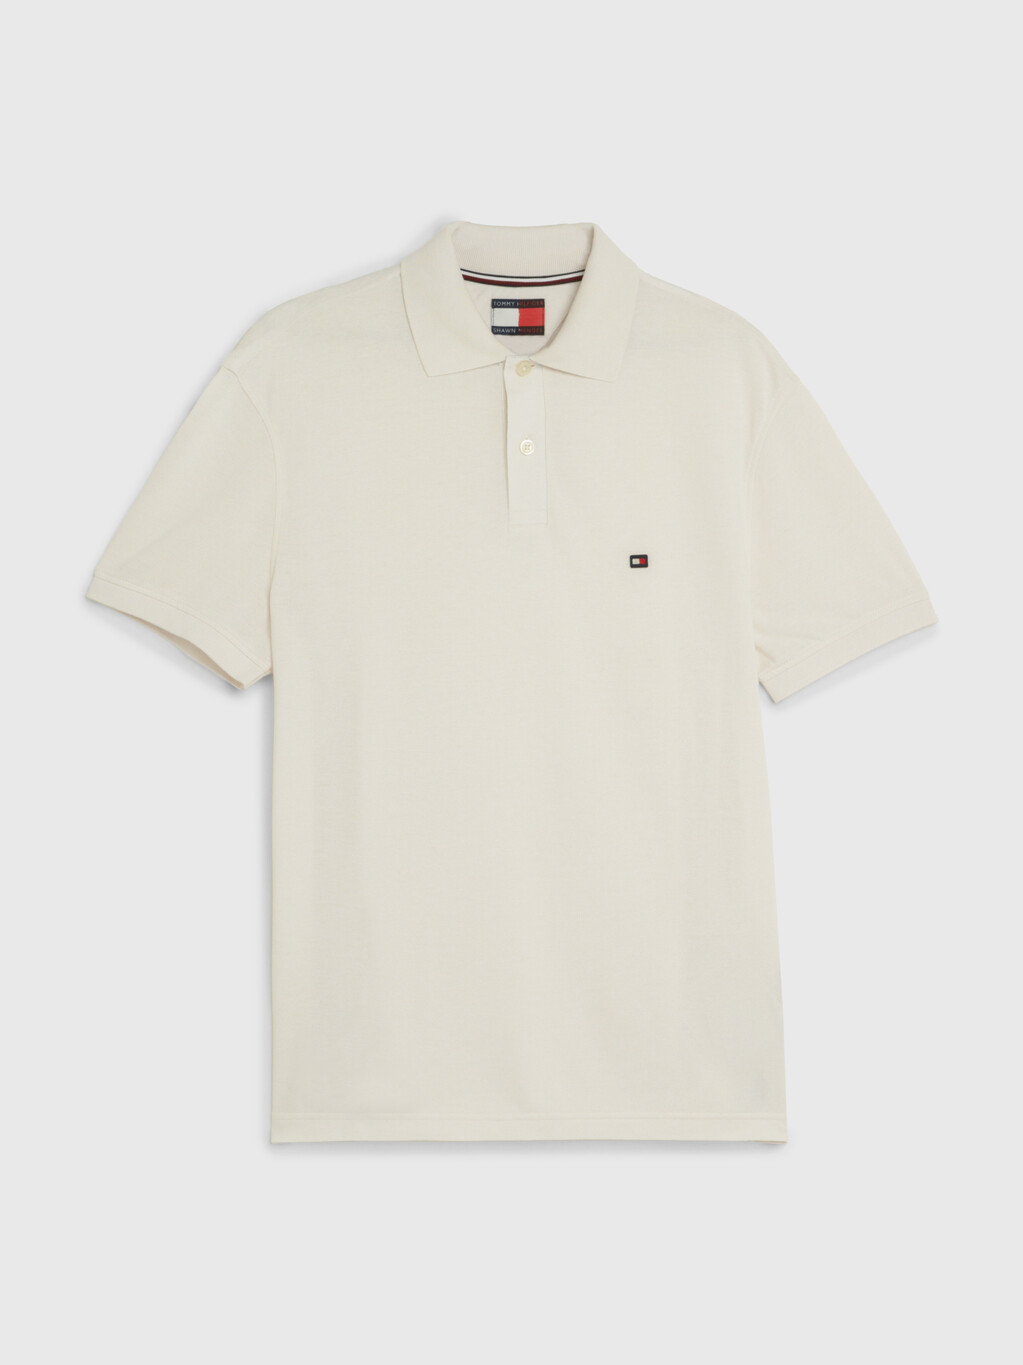 Tommy Hilfiger X Shawn Mendes Polo 衫, Weathered White, hi-res